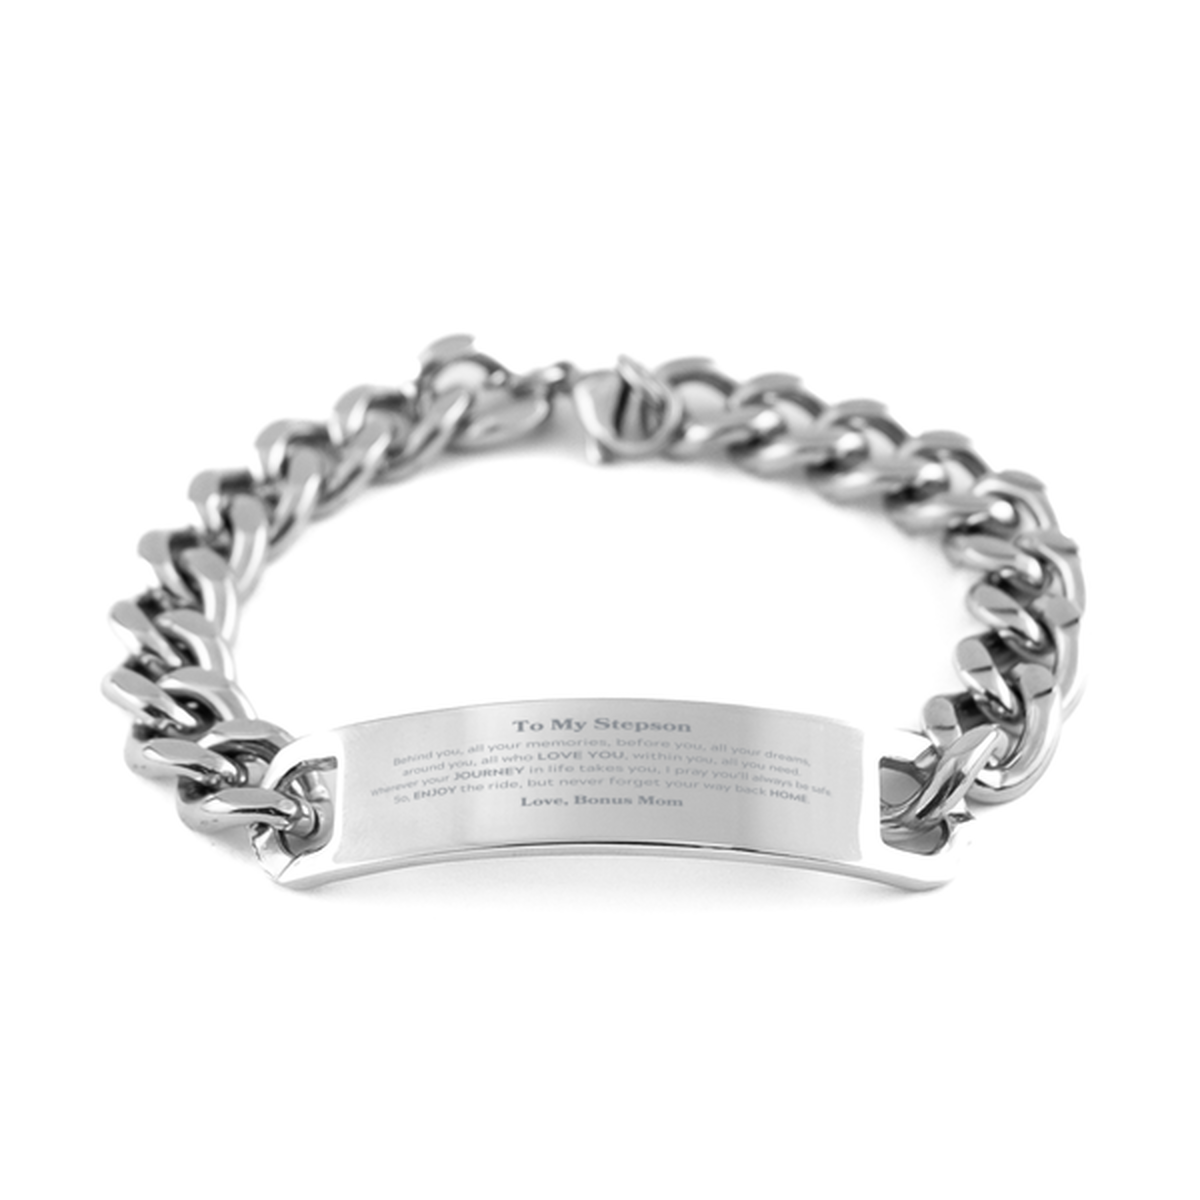 To My Stepson Graduation Gifts from Bonus Mom, Stepson Cuban Chain Stainless Steel Bracelet Christmas Birthday Gifts for Stepson Behind you, all your memories, before you, all your dreams. Love, Bonus Mom